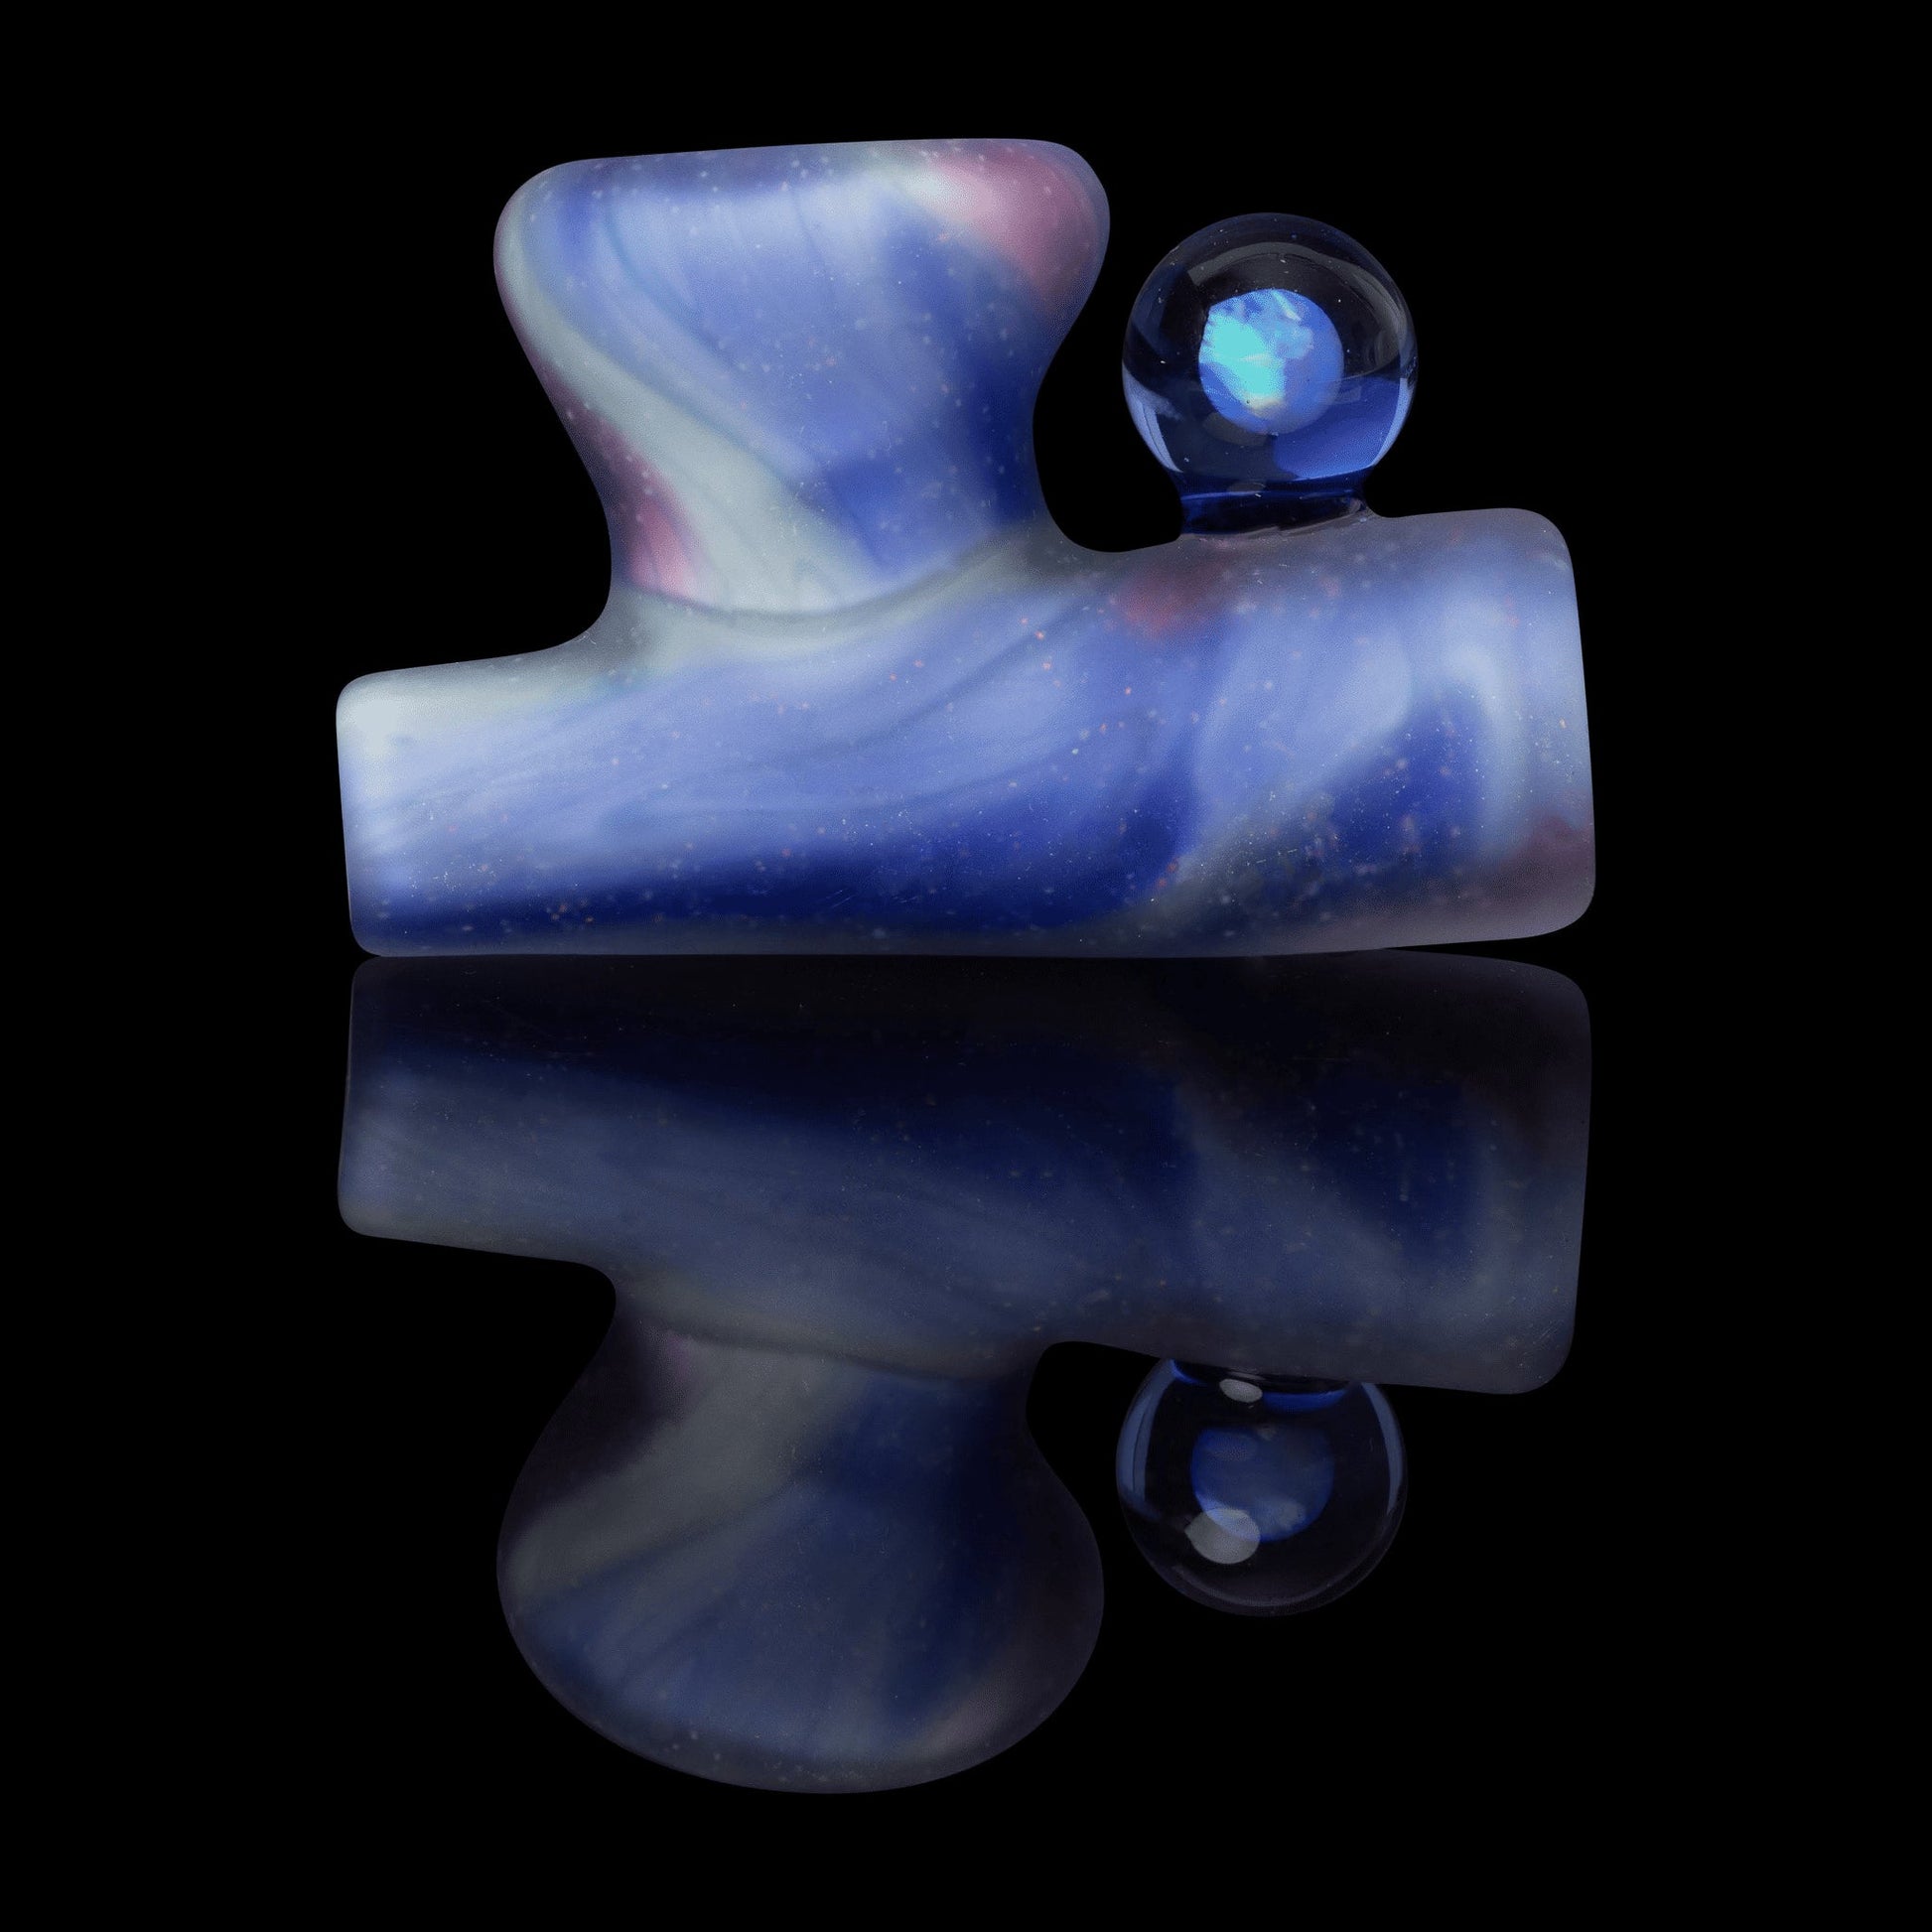 exquisite design of the Collab Ceremonial Three Piece Water Pipe by Elks That Run x Scomo Moanet (Scribble Season 2022)